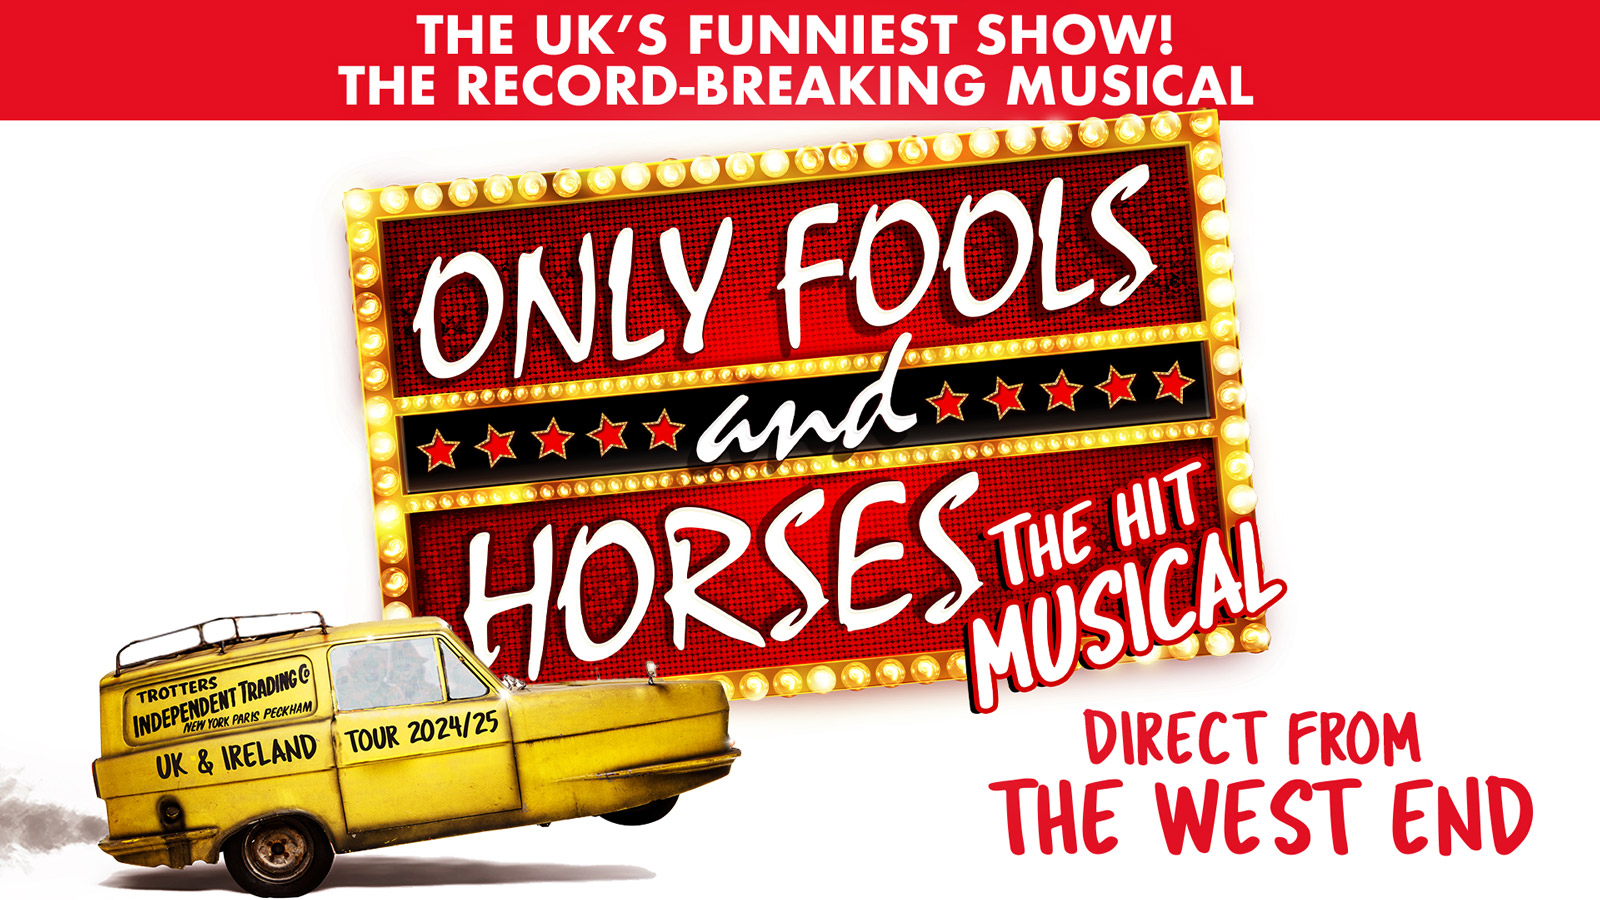 Only Fools and Horses the Musical Tour